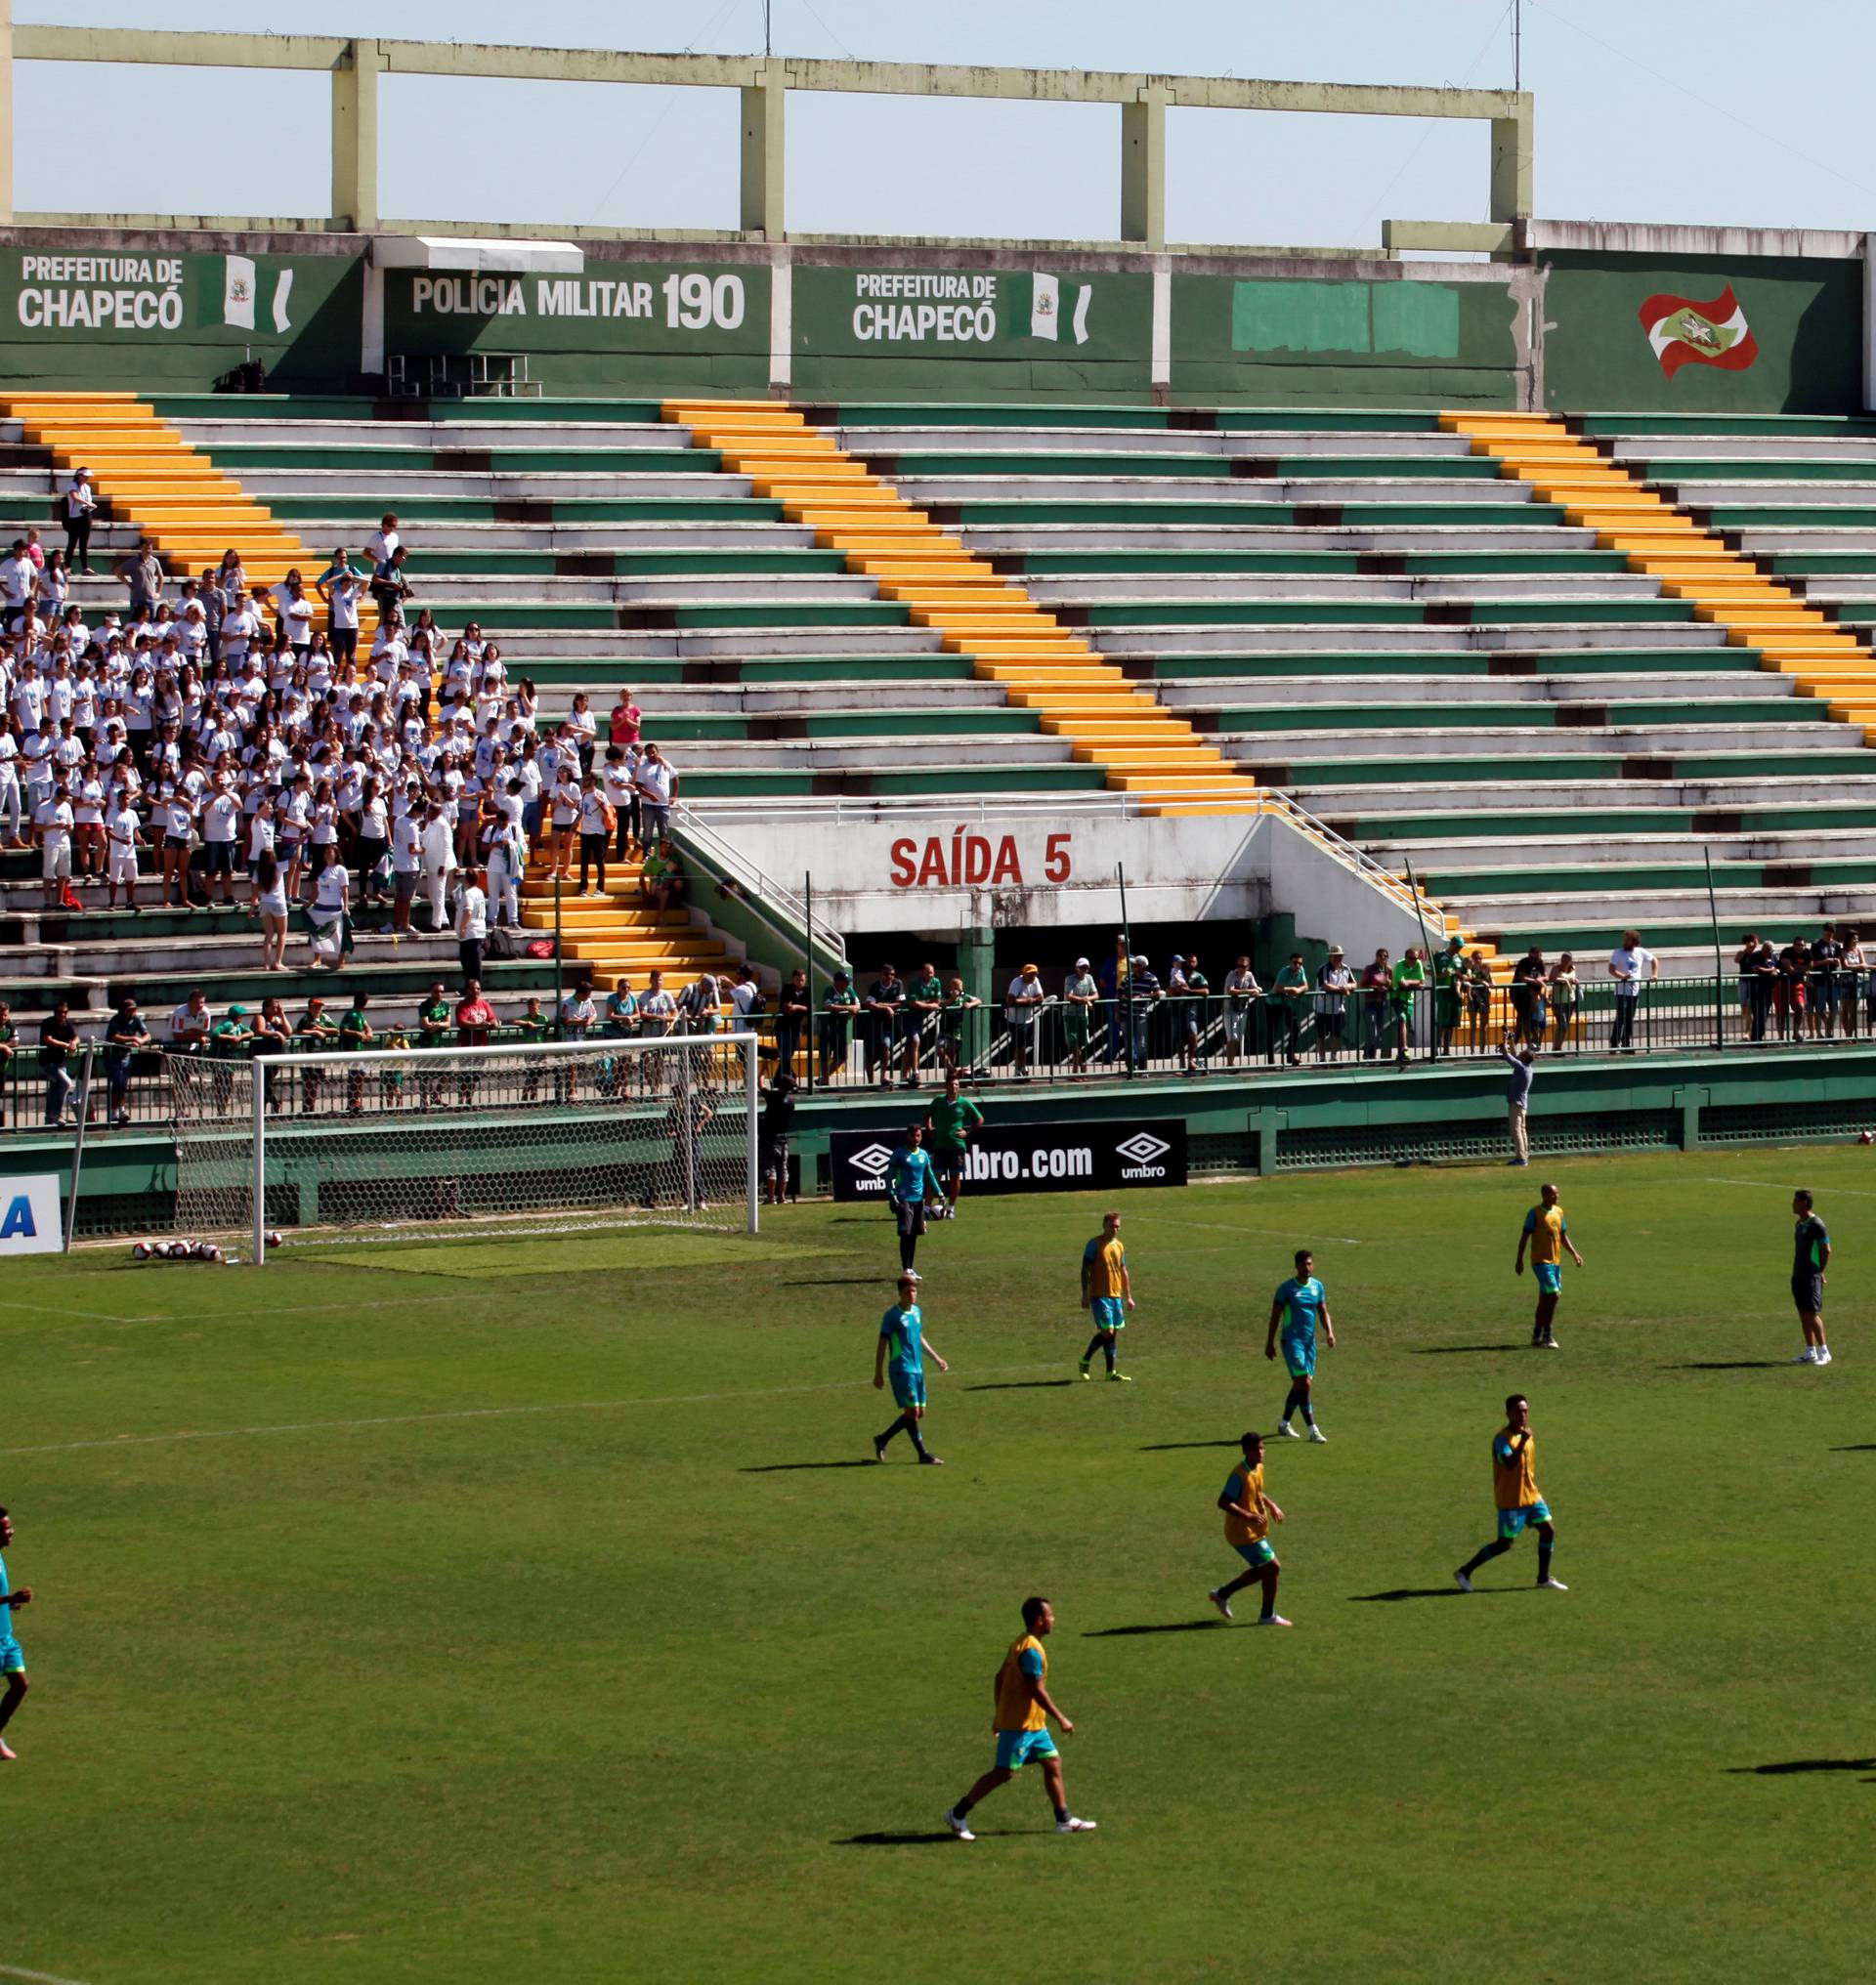 Soccer players of Chapecoense attend a training session at Arena Conda stadium in Chapeco